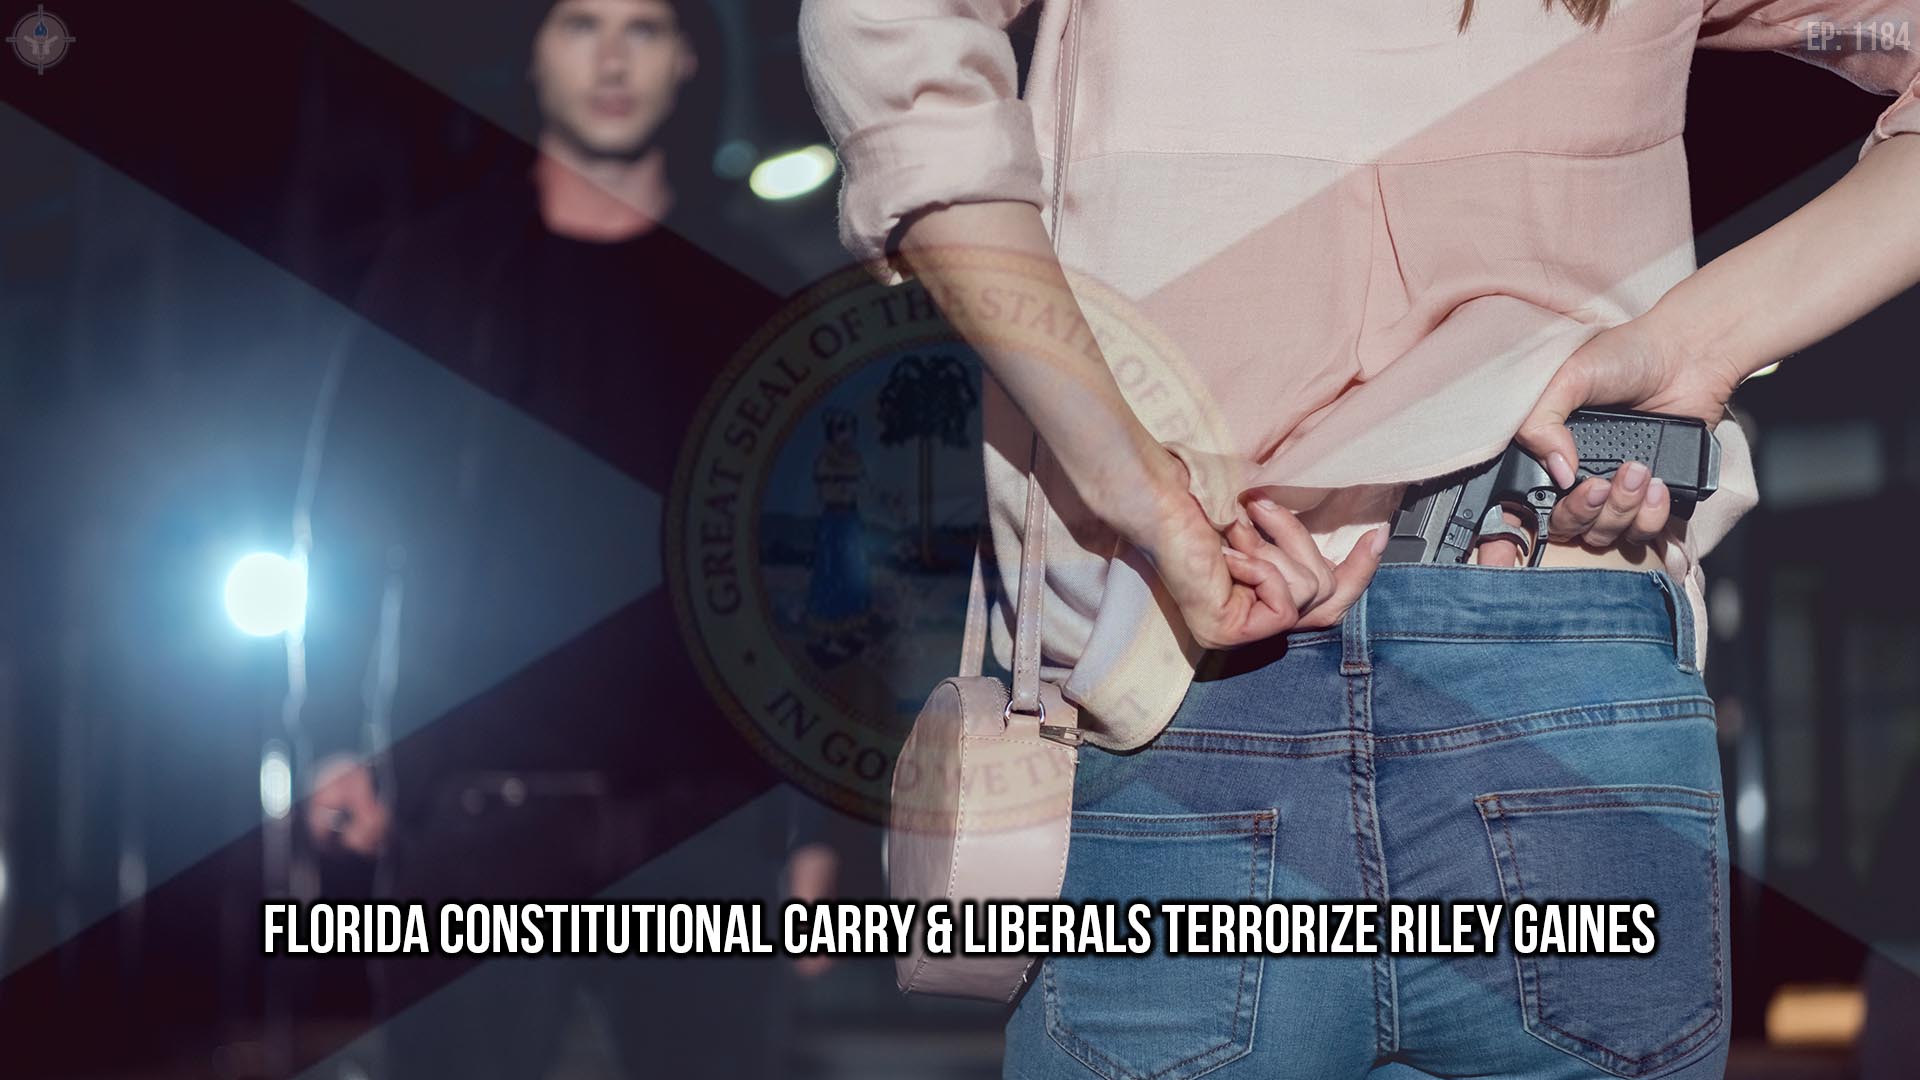 Florida Constitutional Carry & Liberals Terrorize Riley Gaines